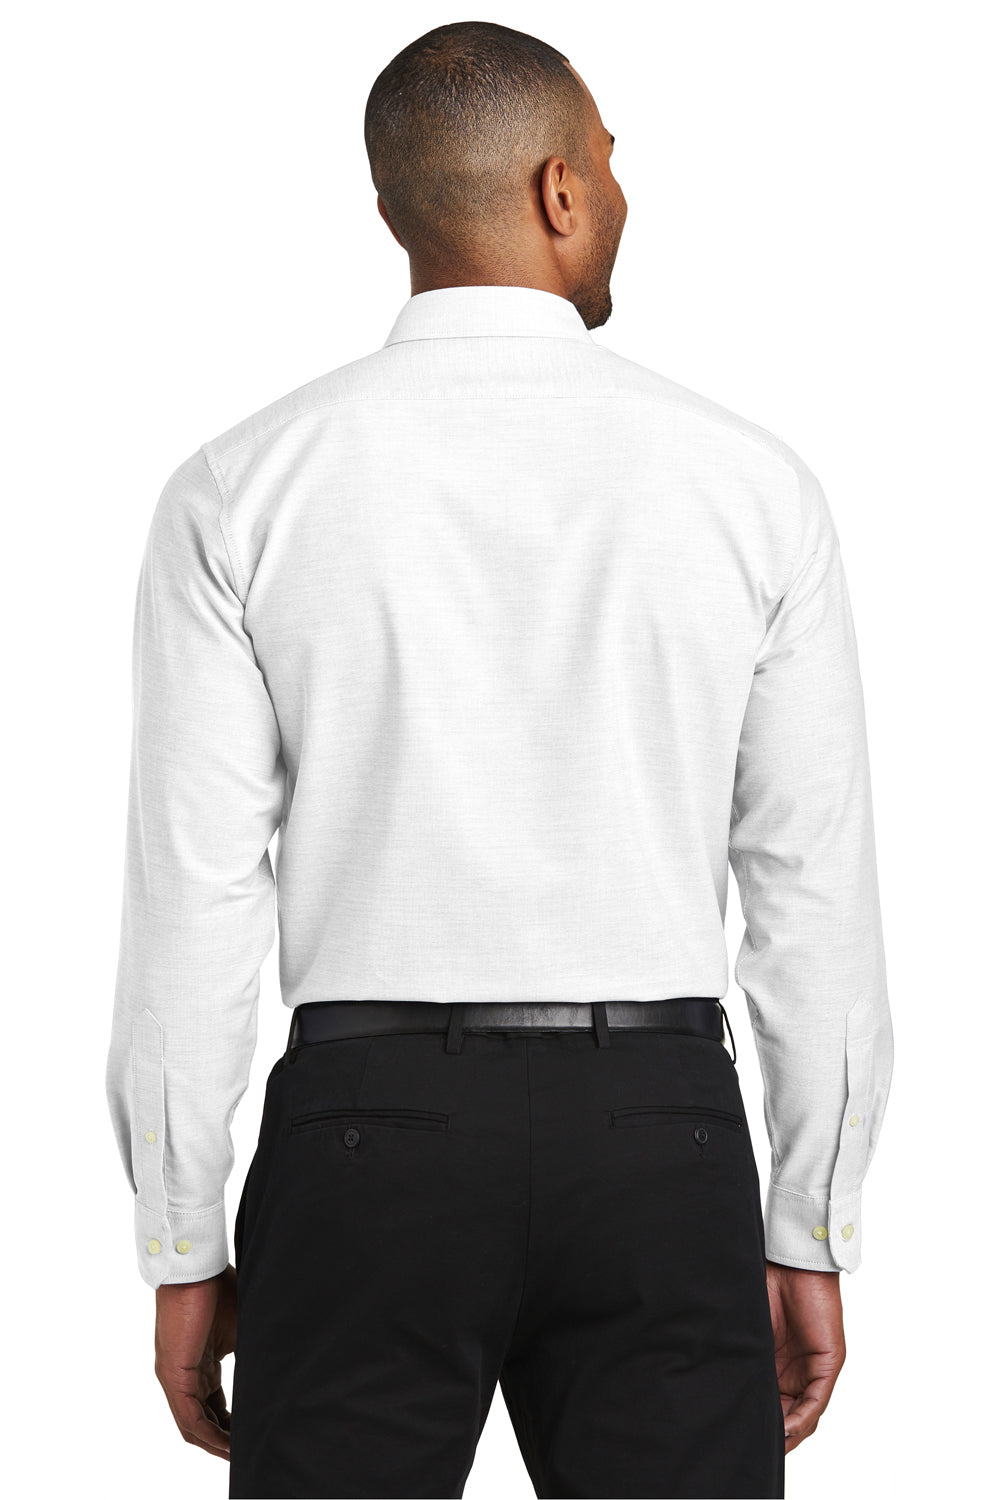 Port Authority S661 Mens SuperPro Oxford Wrinkle Resistant Long Sleeve Button Down Shirt White Back